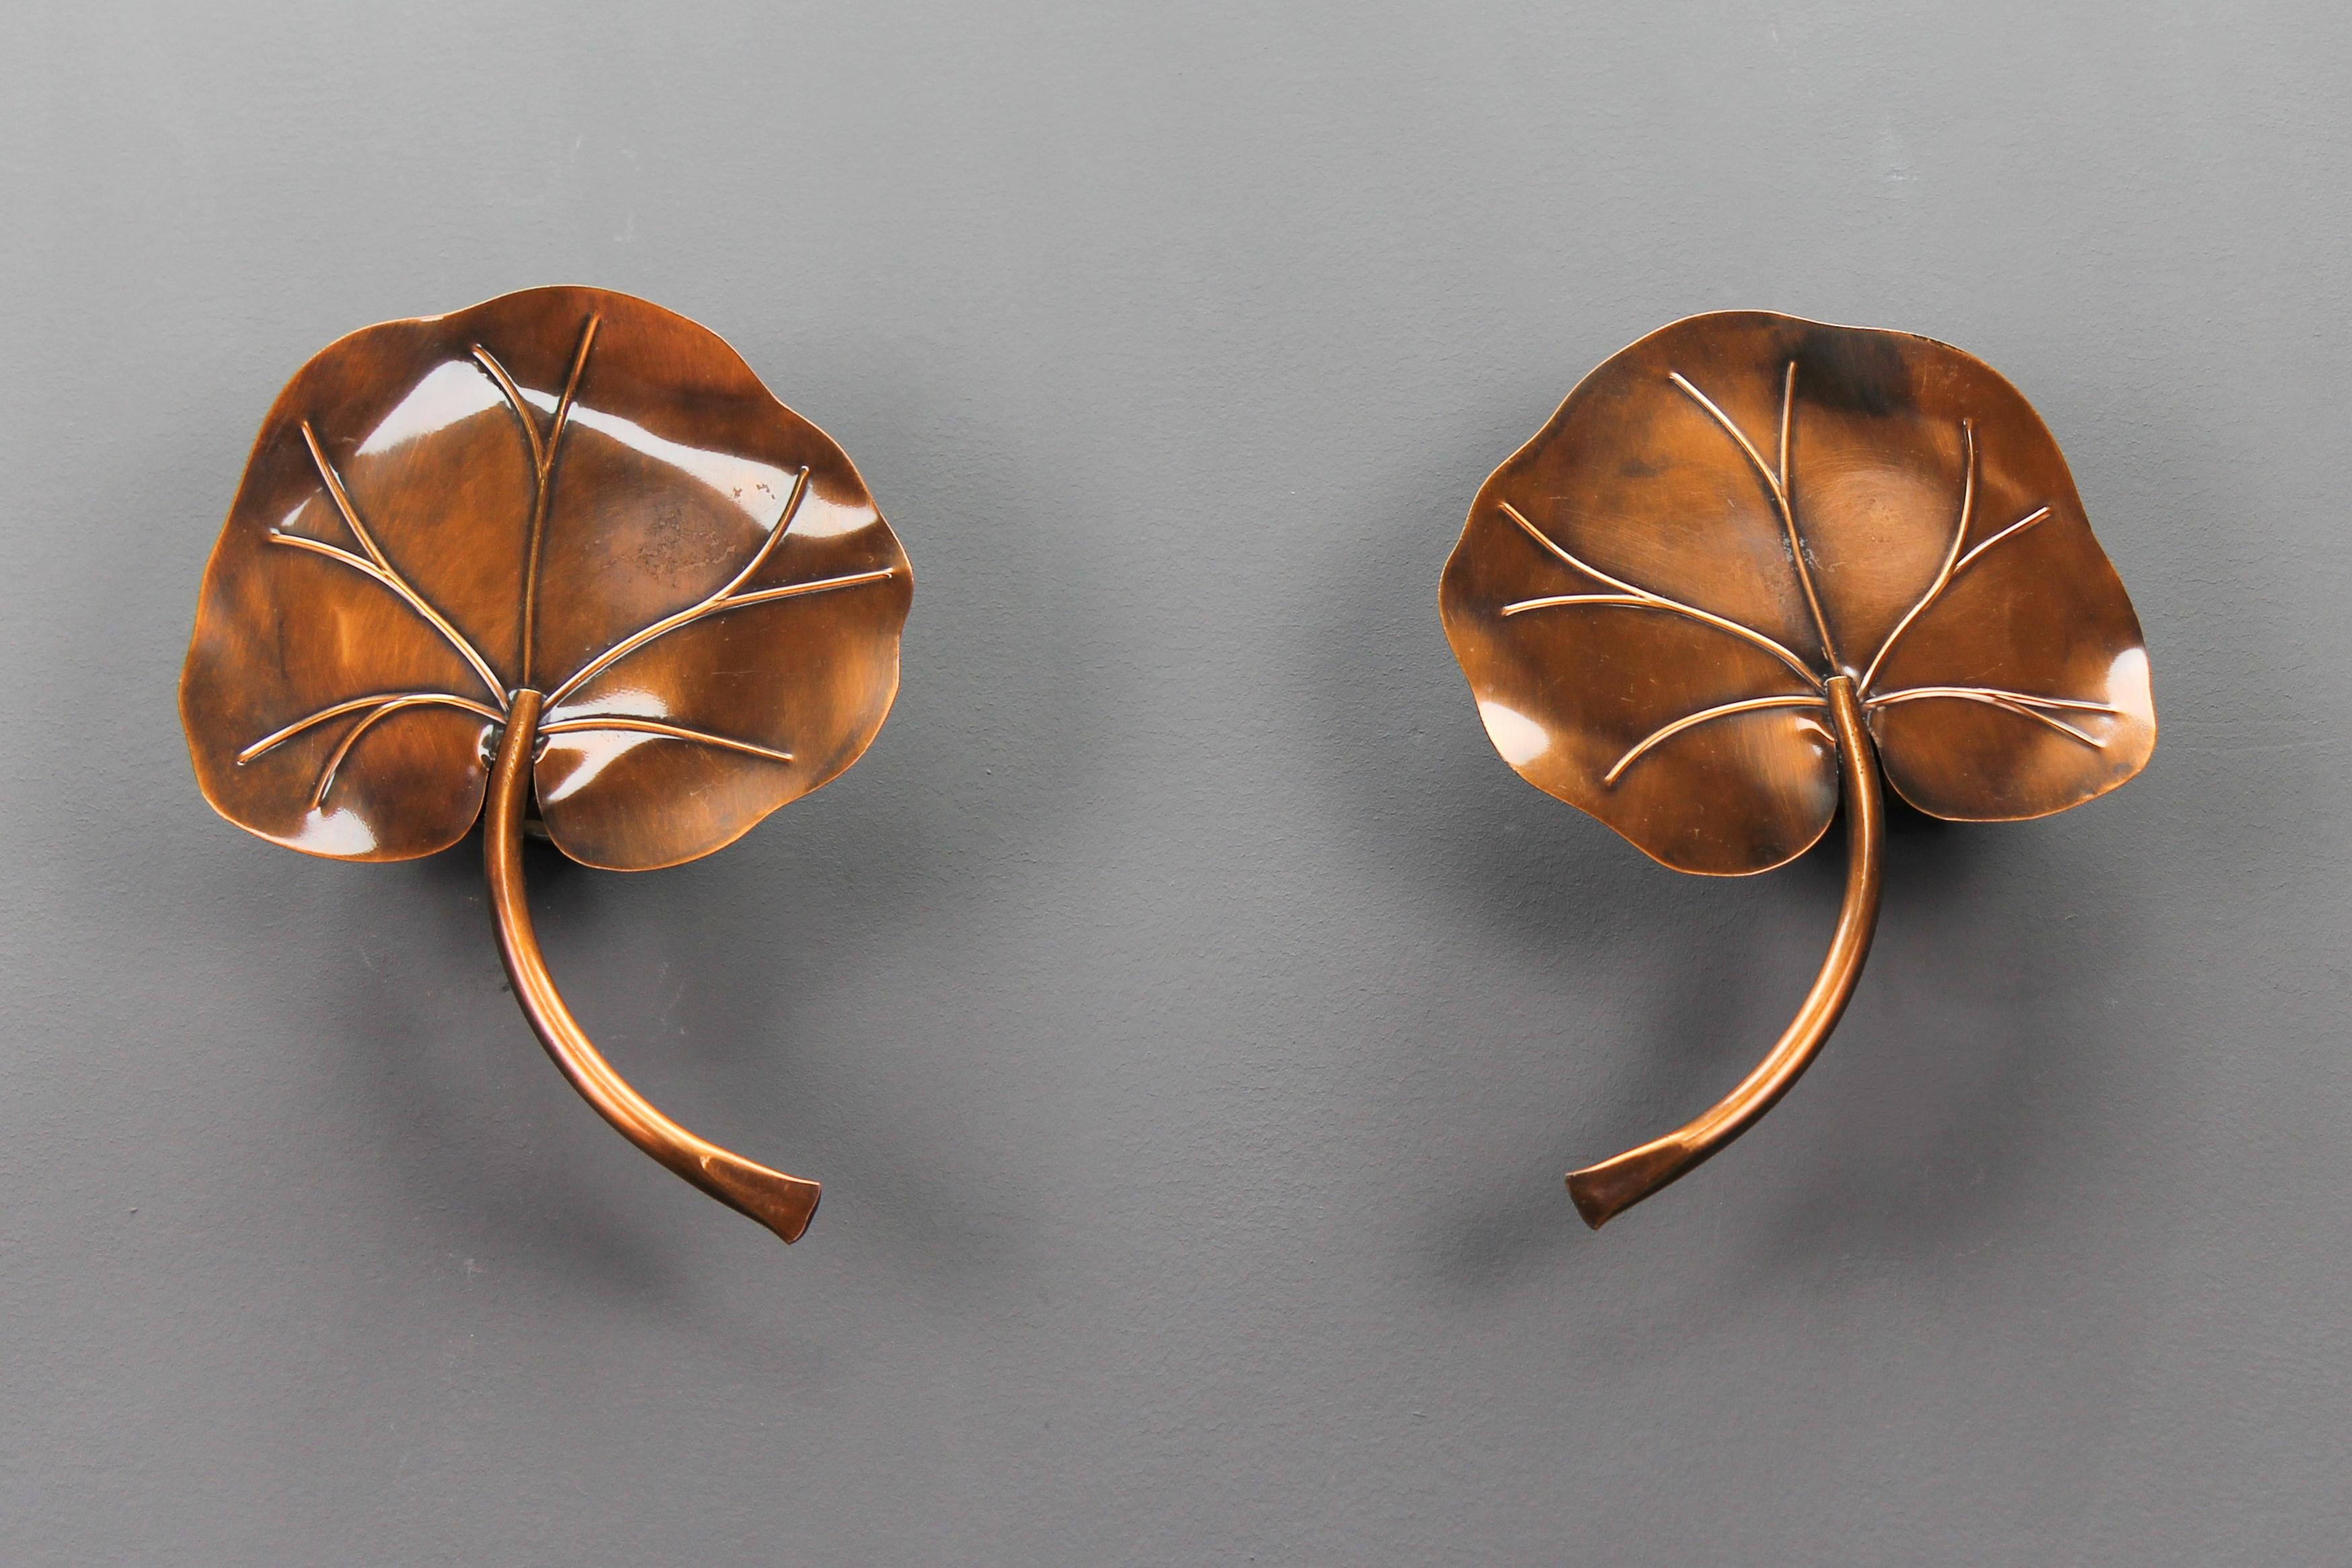 20th Century Pair of French Mid-Century Modern Brass Water Lily Leaf-Shaped Sconces For Sale